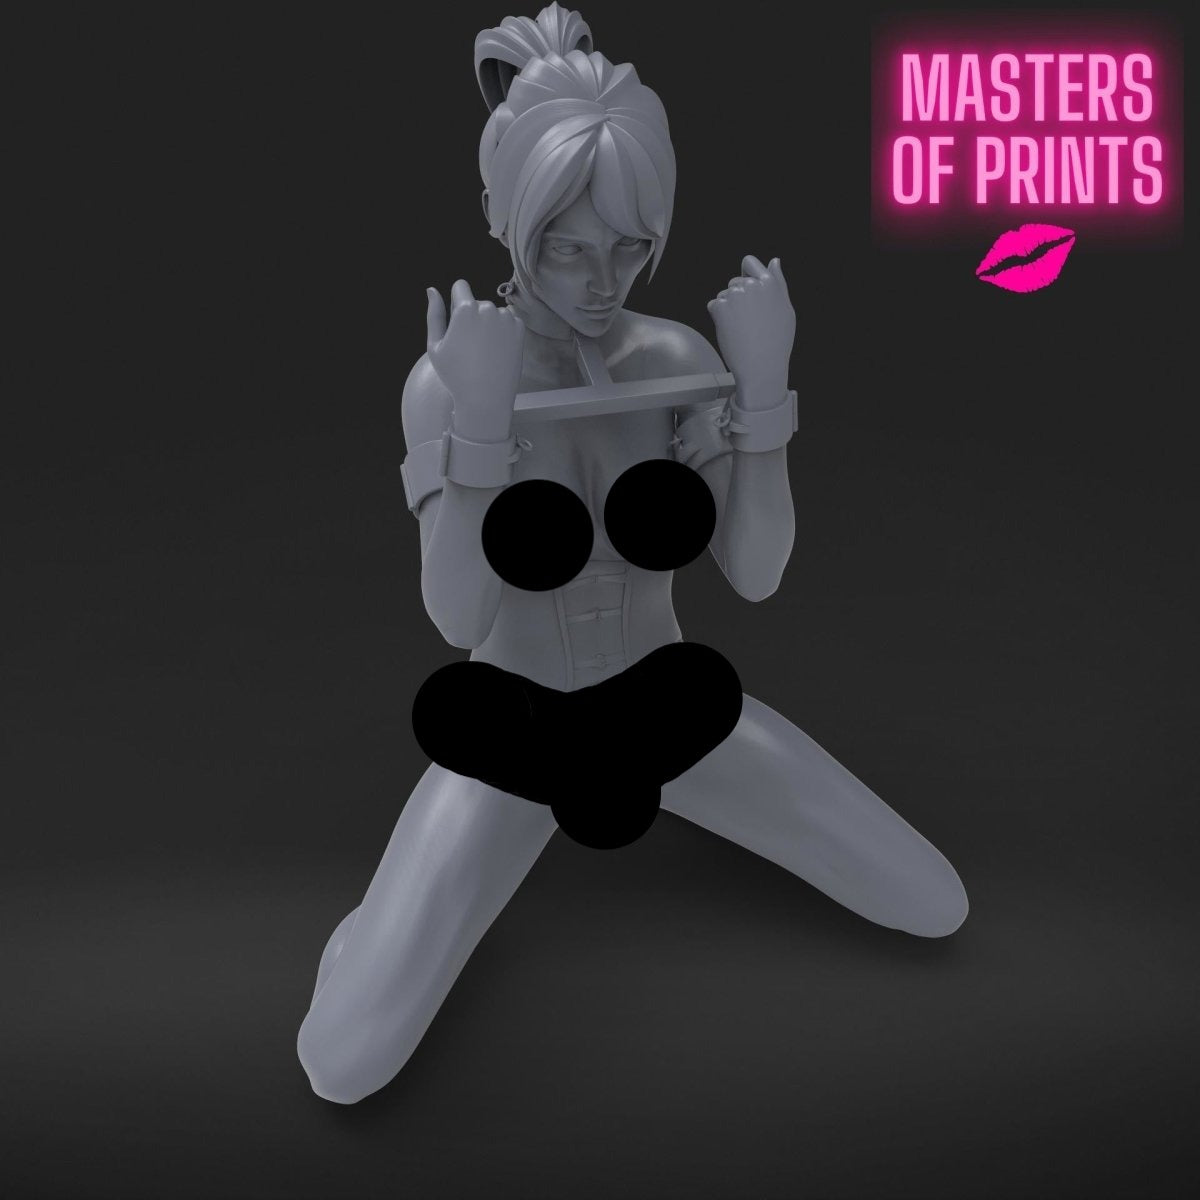 Single Restraint Bar 3 Mature 3d Printed miniature FanArt by Masters Of Prints Collectables Statues & Figurines